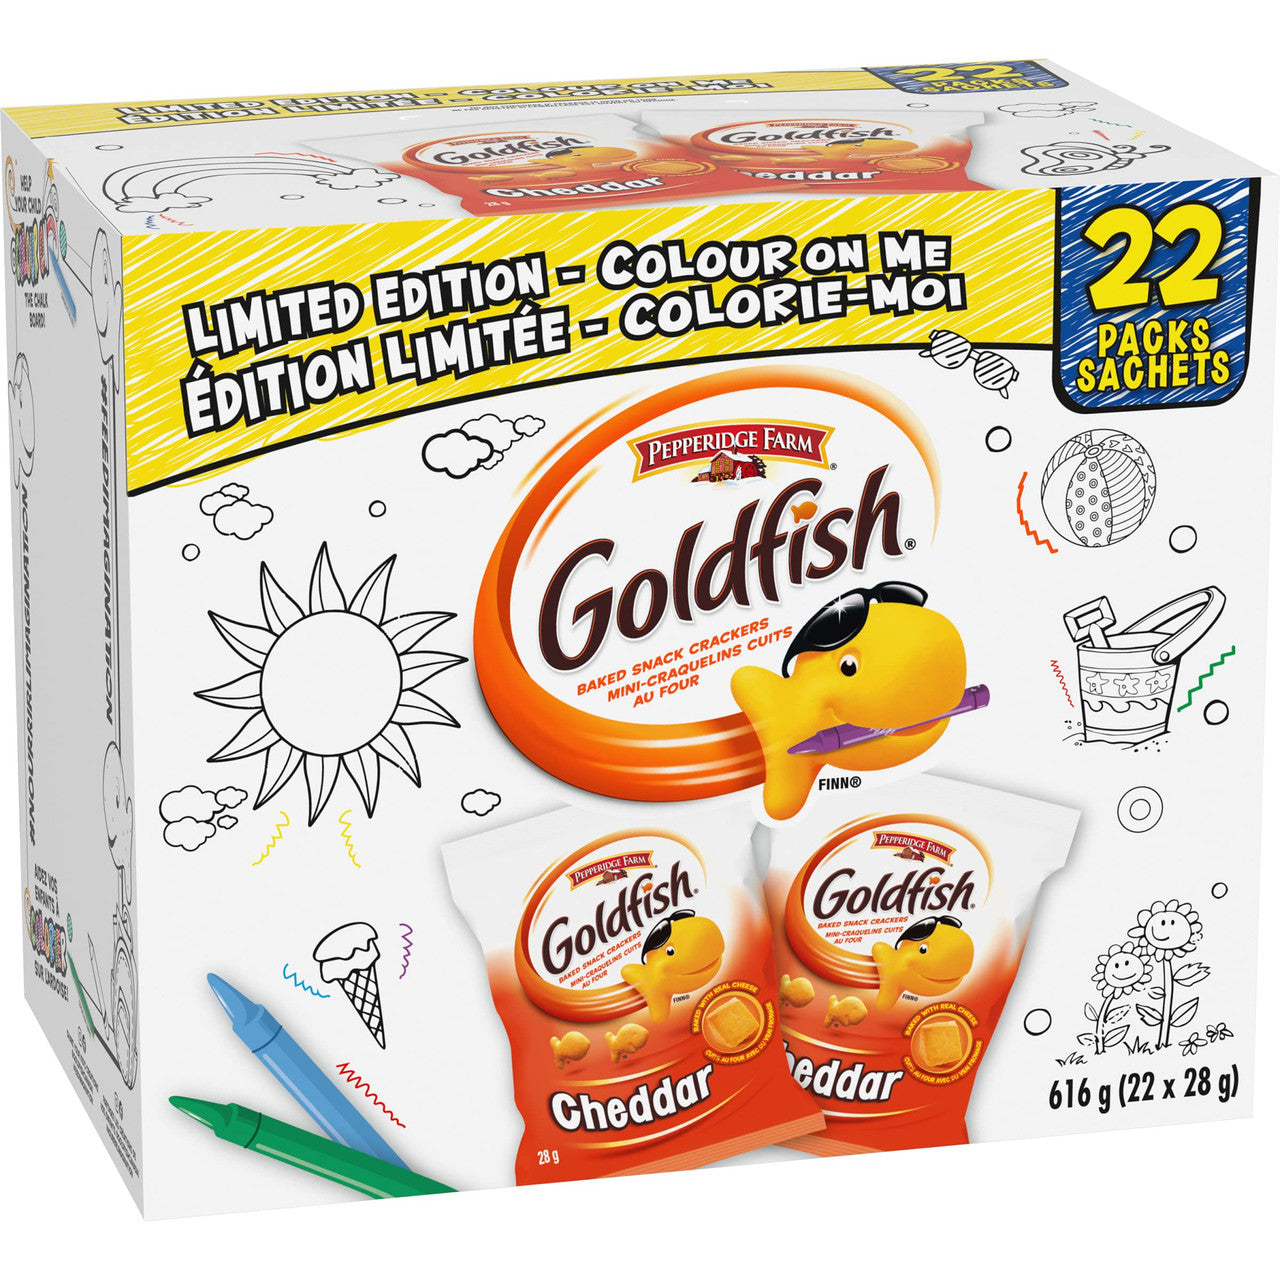 Pepperidge Farm Goldfish Cheddar Crackers, 22 Snack Packs, 28g/1 oz. Each {Imported from Canada}